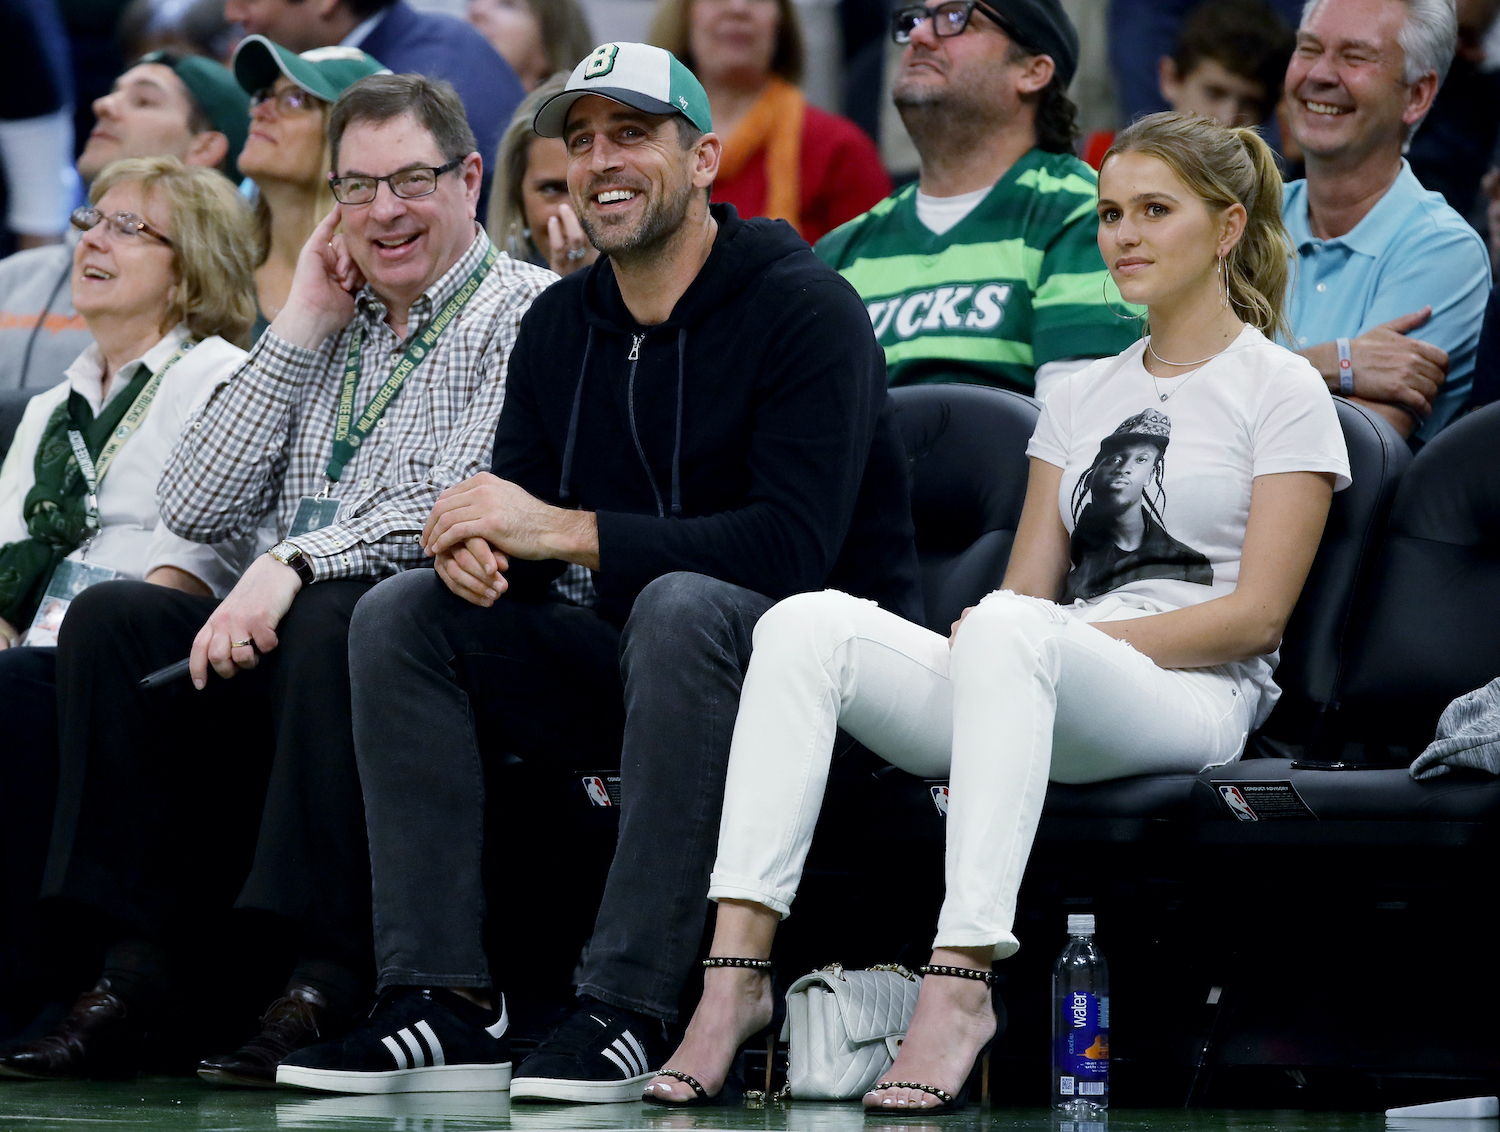 Green Bay Packers quarterback and Milwaukee Bucks owner Aaron Rodgers watches an NBA game from the sideines.